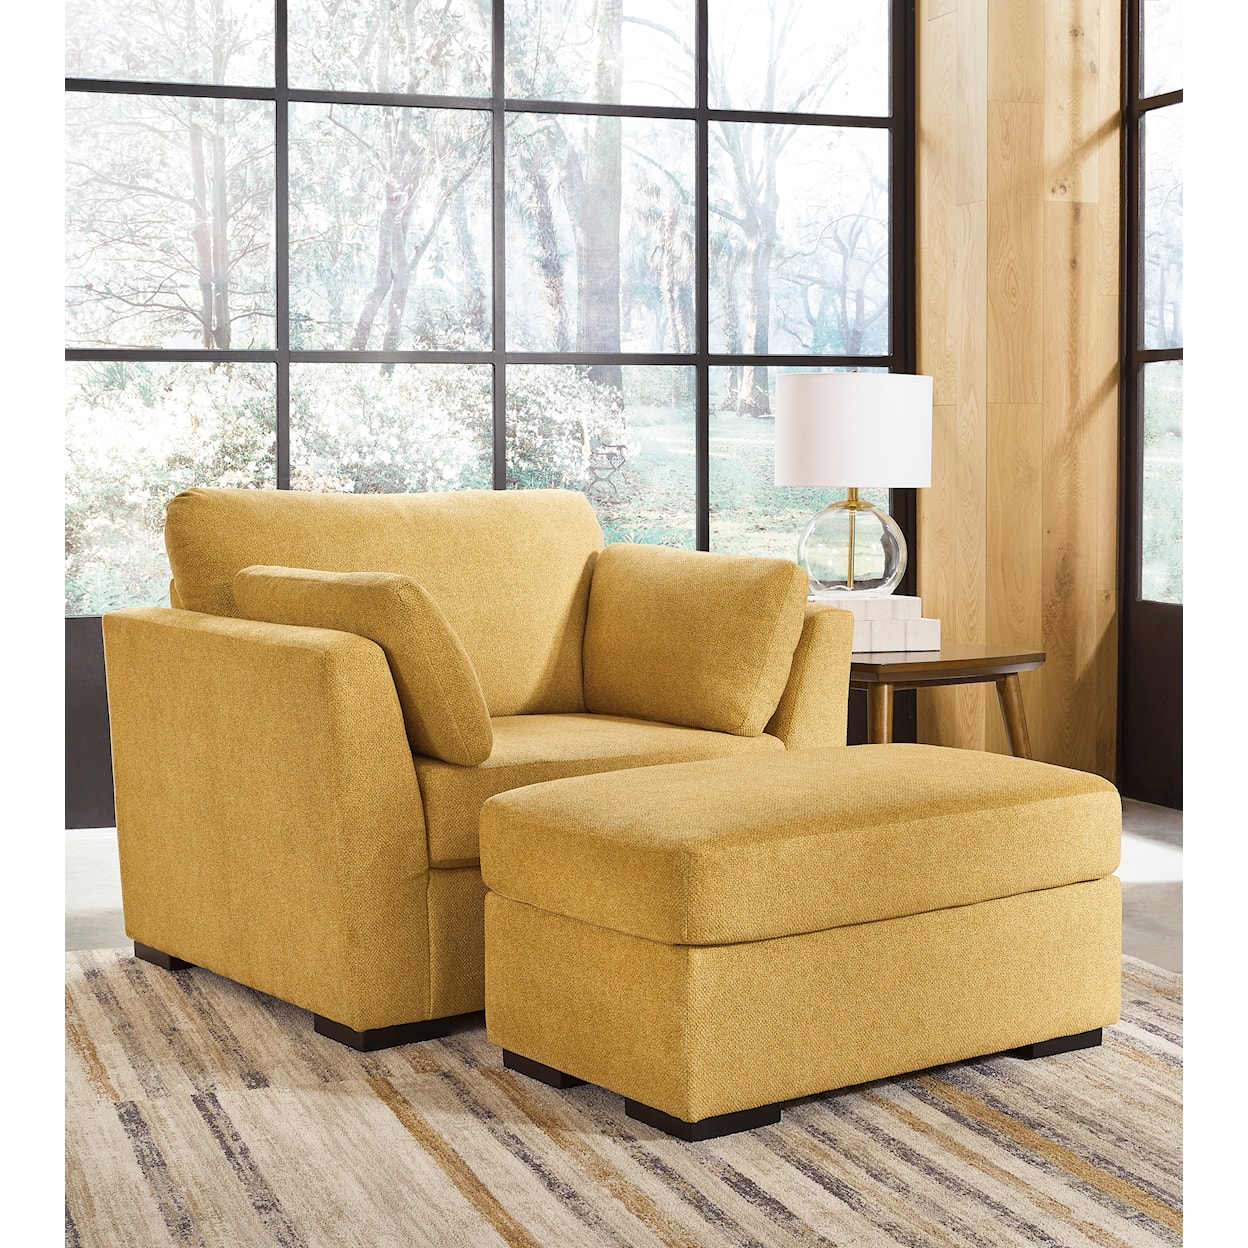 Benchcraft Keerwick Oversized Chair and Ottoman